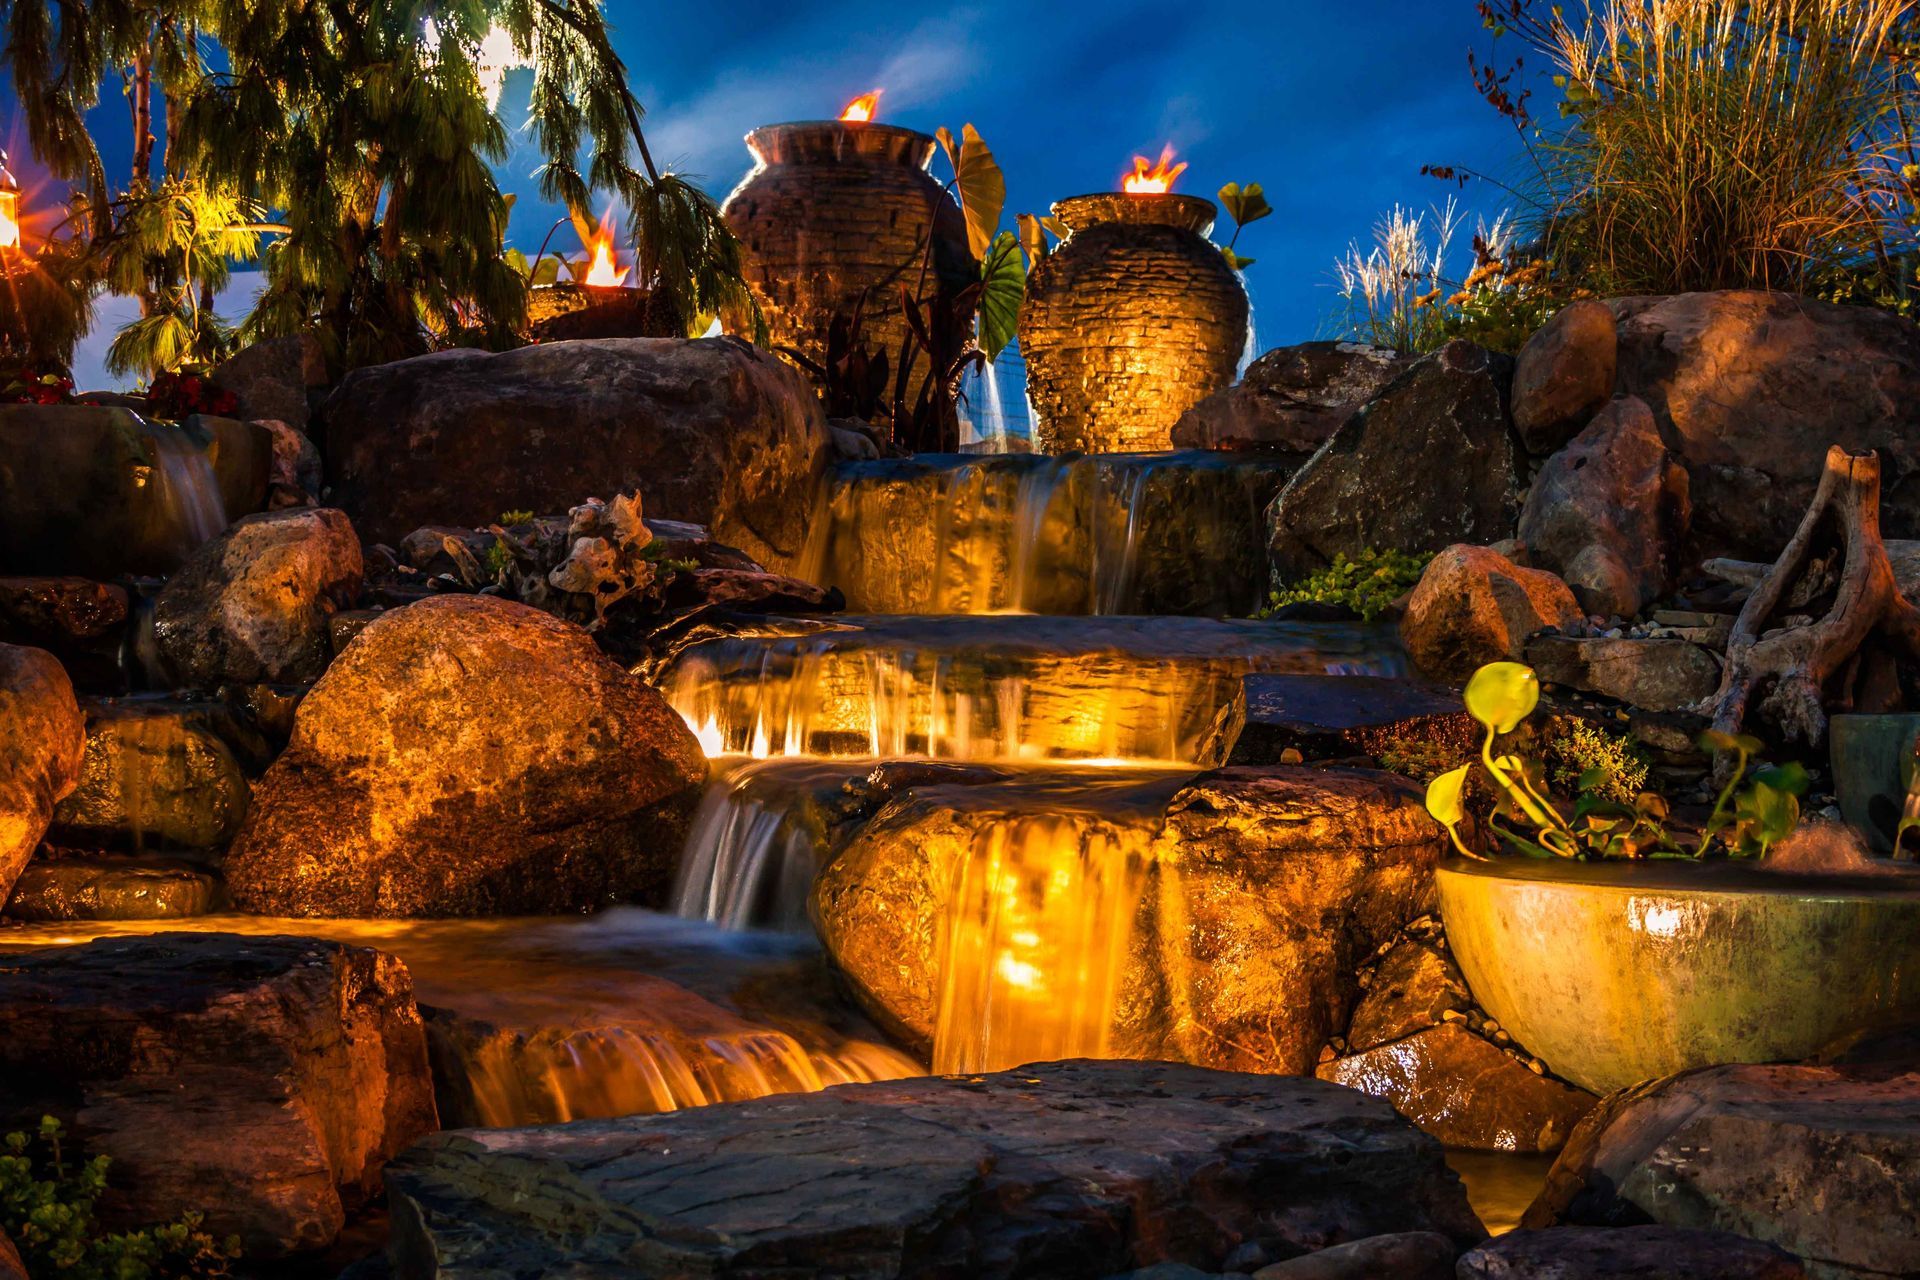 A Cascading Water Fall Flowing Over Stones, The Entire Water Feature Is Lit Up With Landscape Lighting